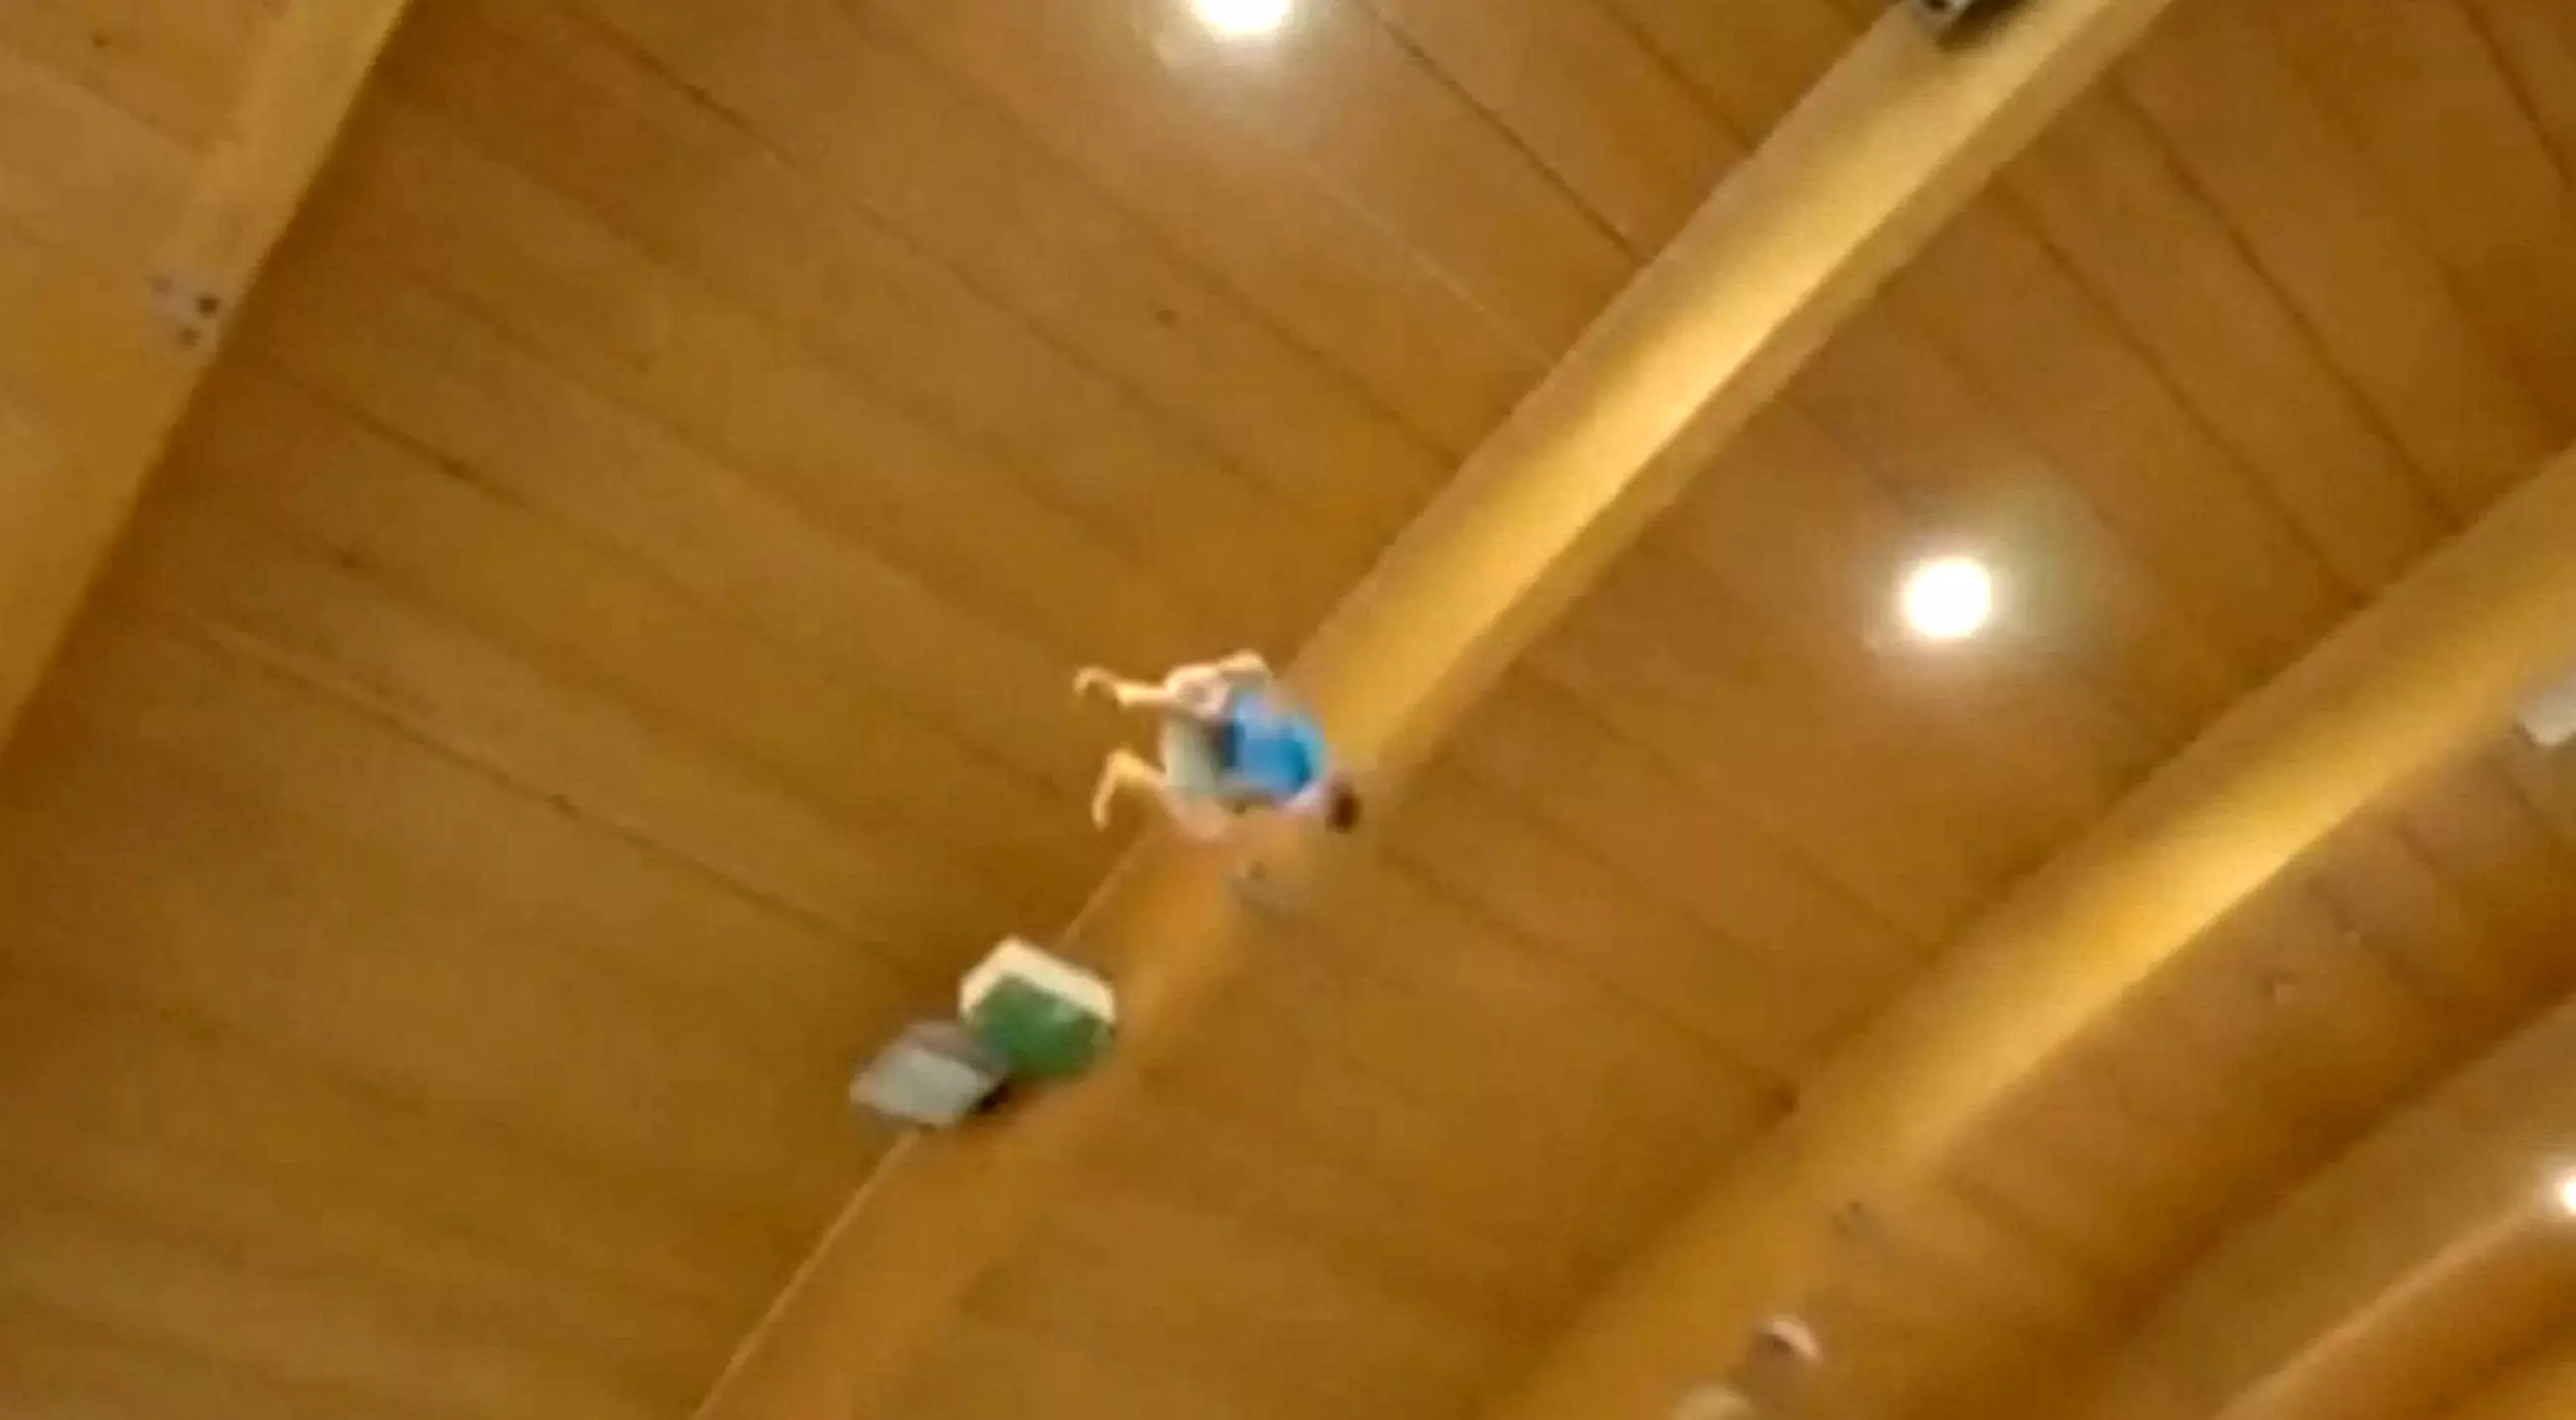 Ernest nearly hit the ceiling when he completed the seven-flip jump.